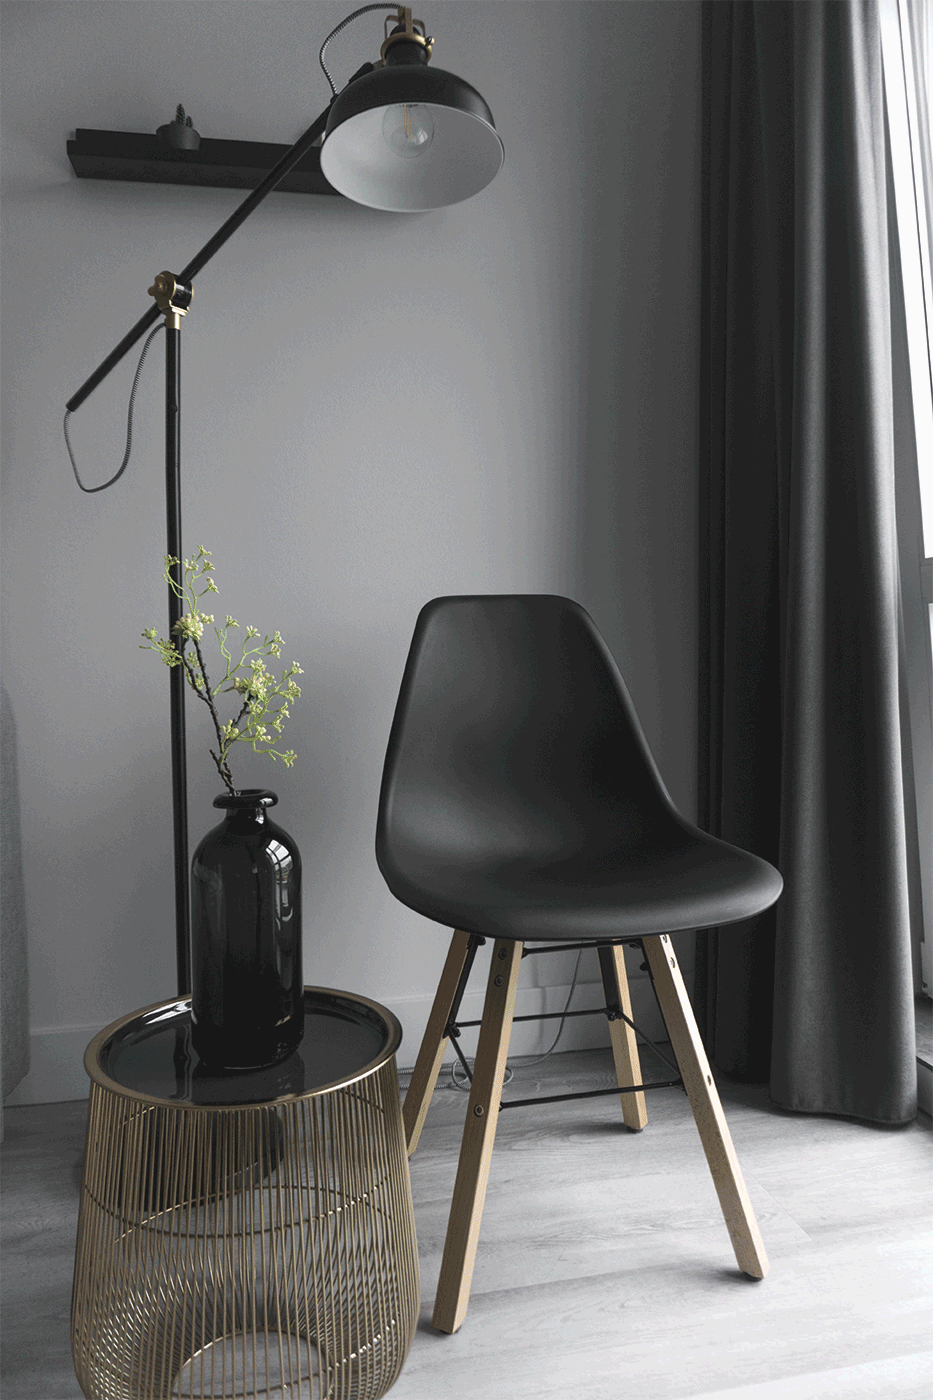 modern black chair and side table under a lamp